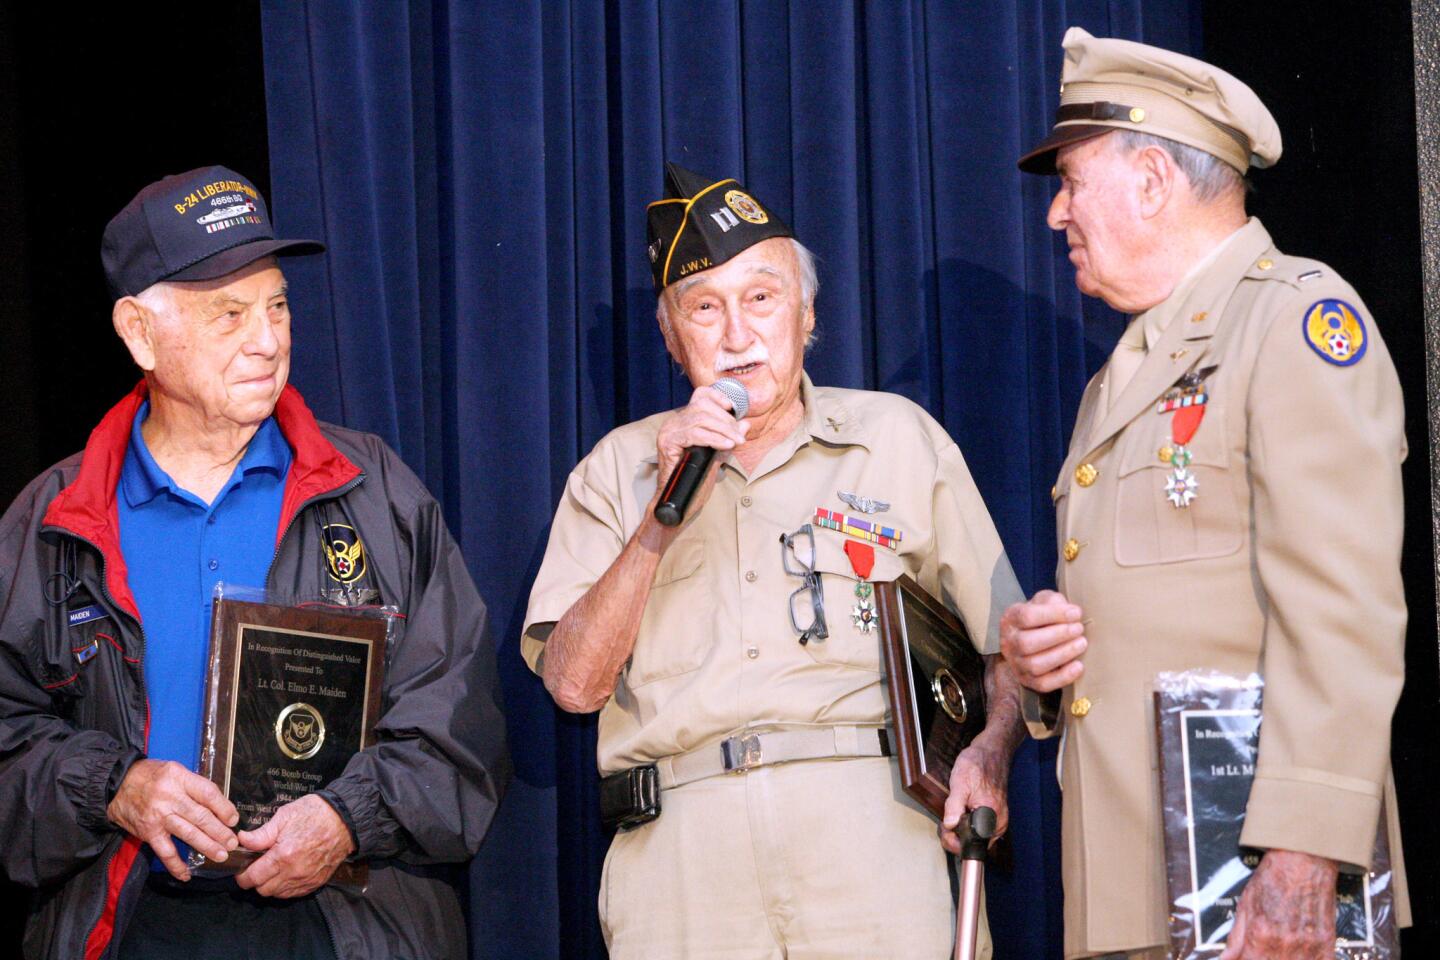 Flanked by World War II heroes Lt. Col. Elmo E. Maiden, 97, left, and Lt. Michael A. La Vere, 90, right, Army Air Corps Cpt. Art Sherman, 94, speaks during Wilson Middle School Veteran's Day assembly at the Glendale school on Tuesday, November 10, 2015. Maiden was a pilot on a B-24 Liberator and flew 35 combat missions from 1944-45. La Vere was a navigator on a B-24 in Europe from 1943-45. Sherman was a bombardier and an intelligence officer in Italy during World War II as well. A special presentation for World War II hero Louis Zamperini was also shown.